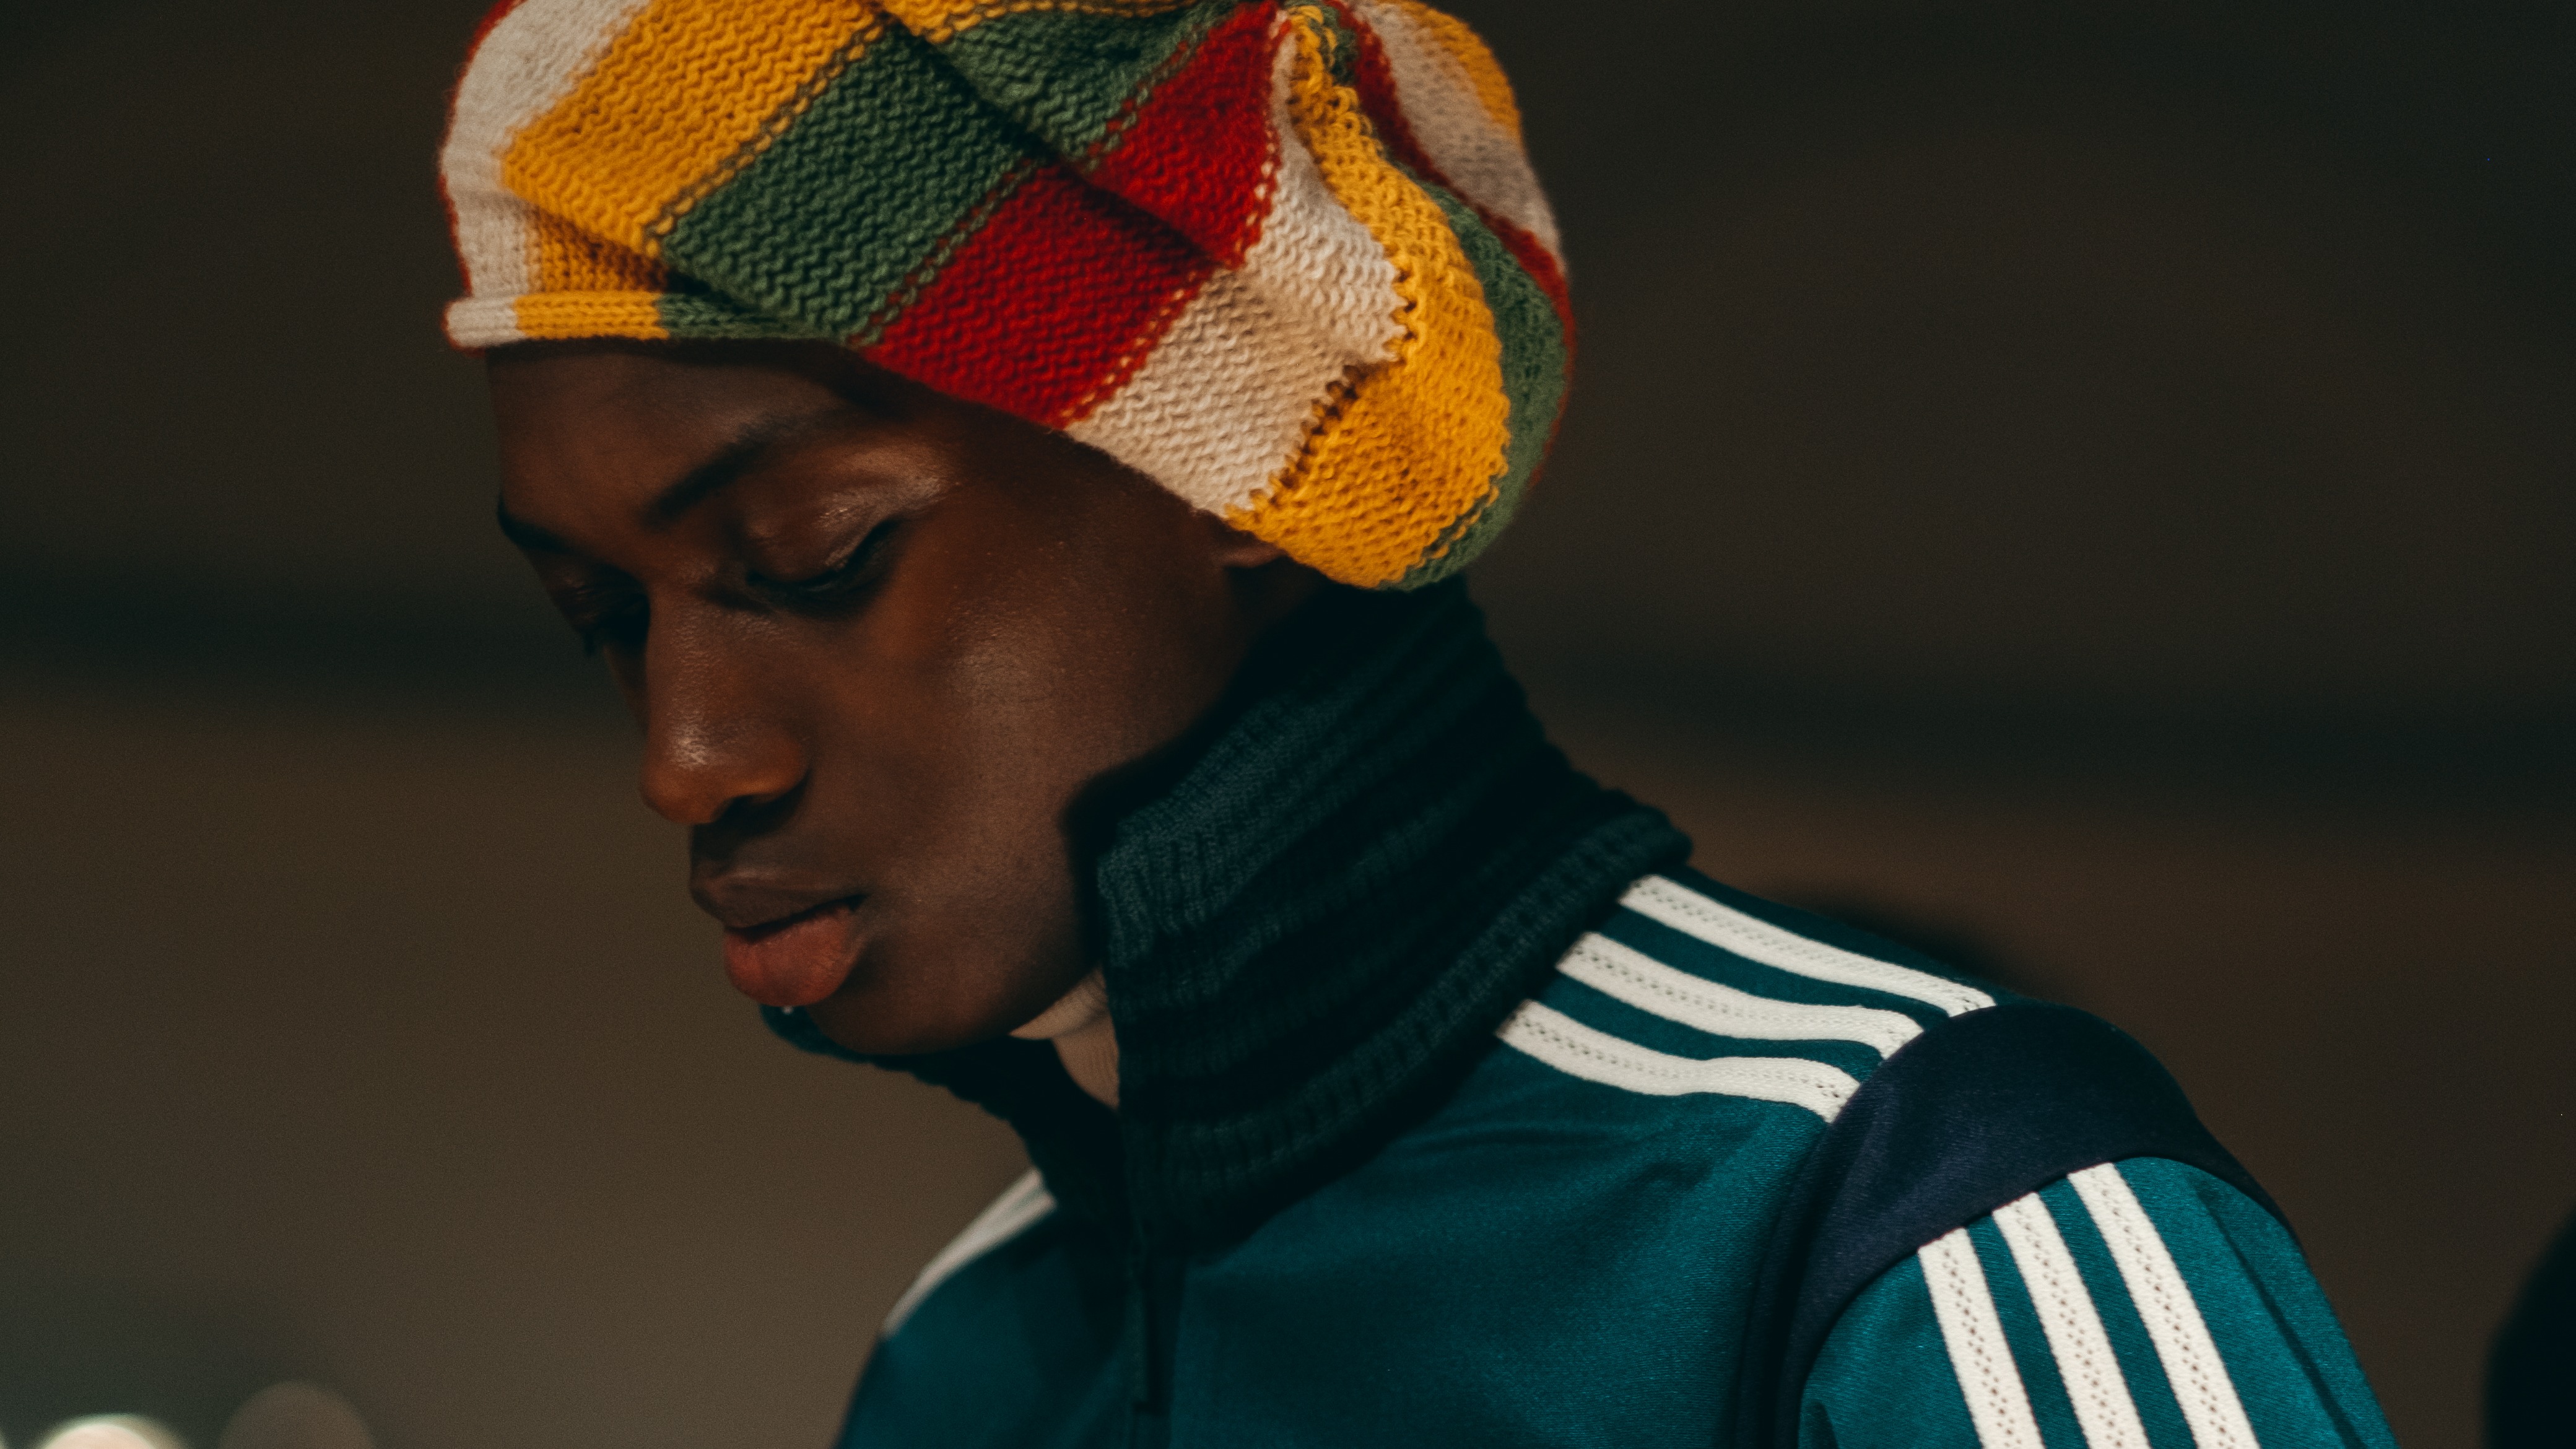 The Star In Stripes Grace Wales Bonner S Collaborative Coup With Adidas Financial Times